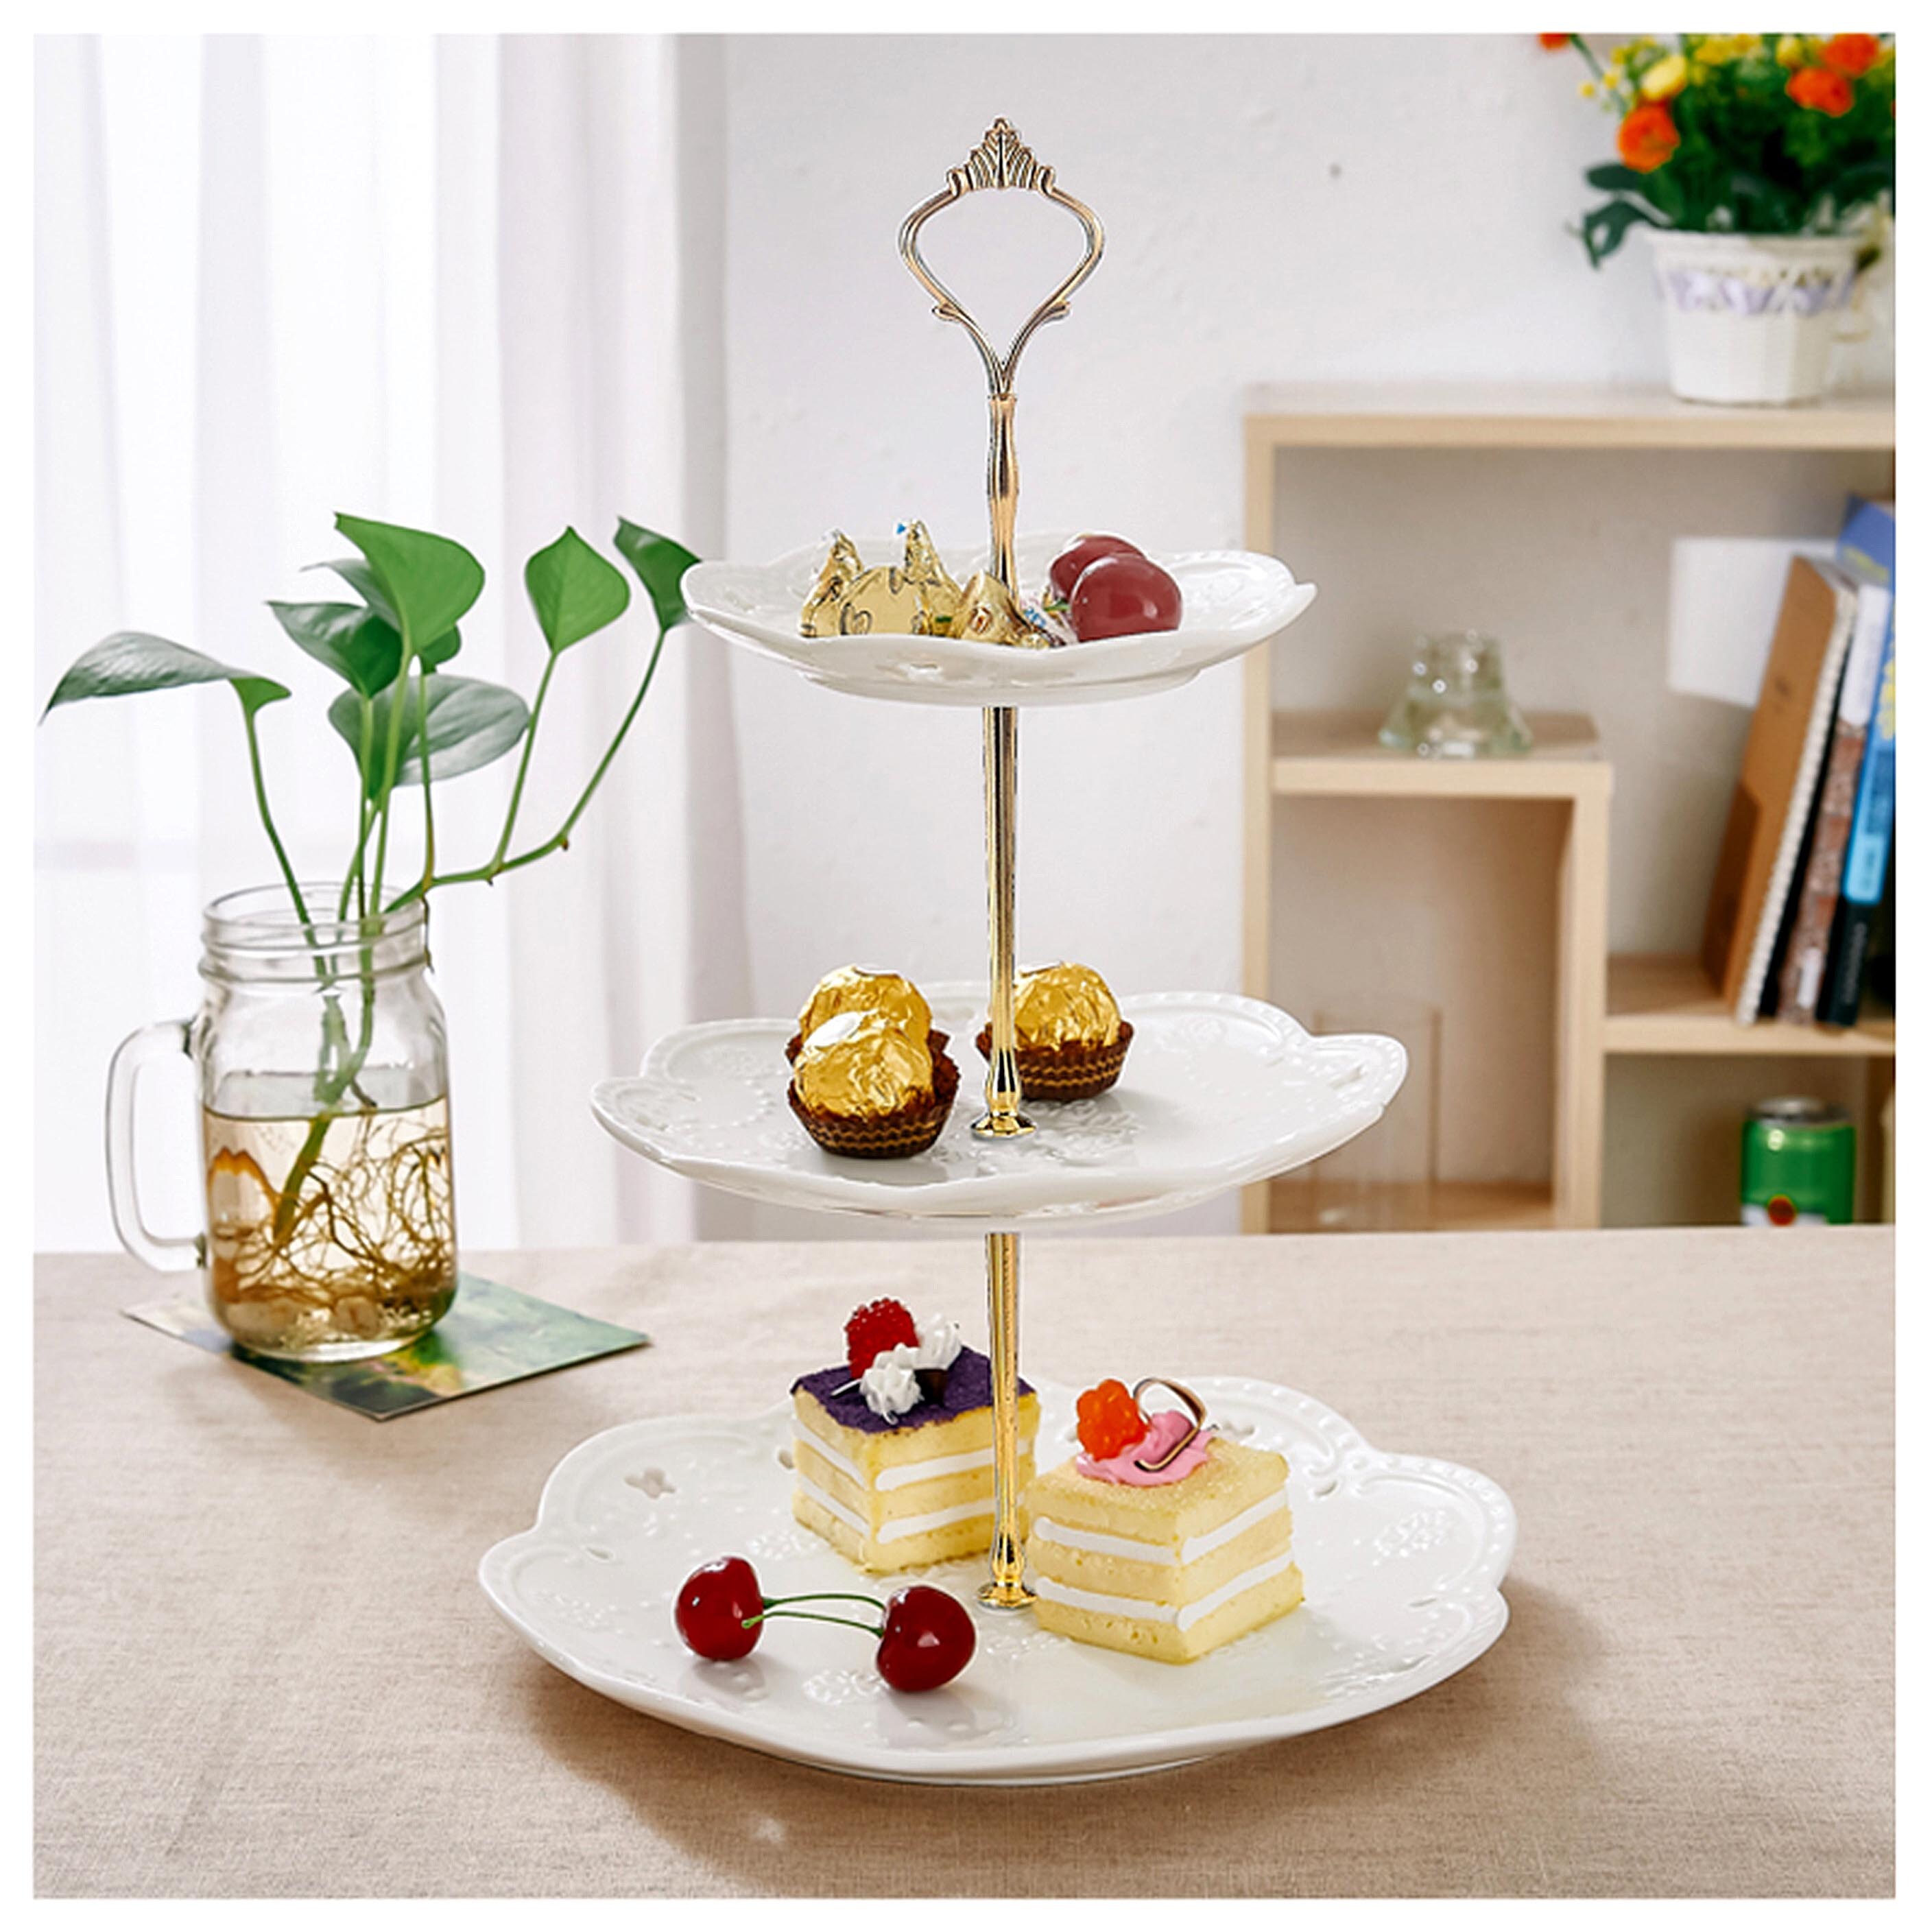 MALACASA 3-Tiered Cupcake Tower Stand Porcelain White Tiered